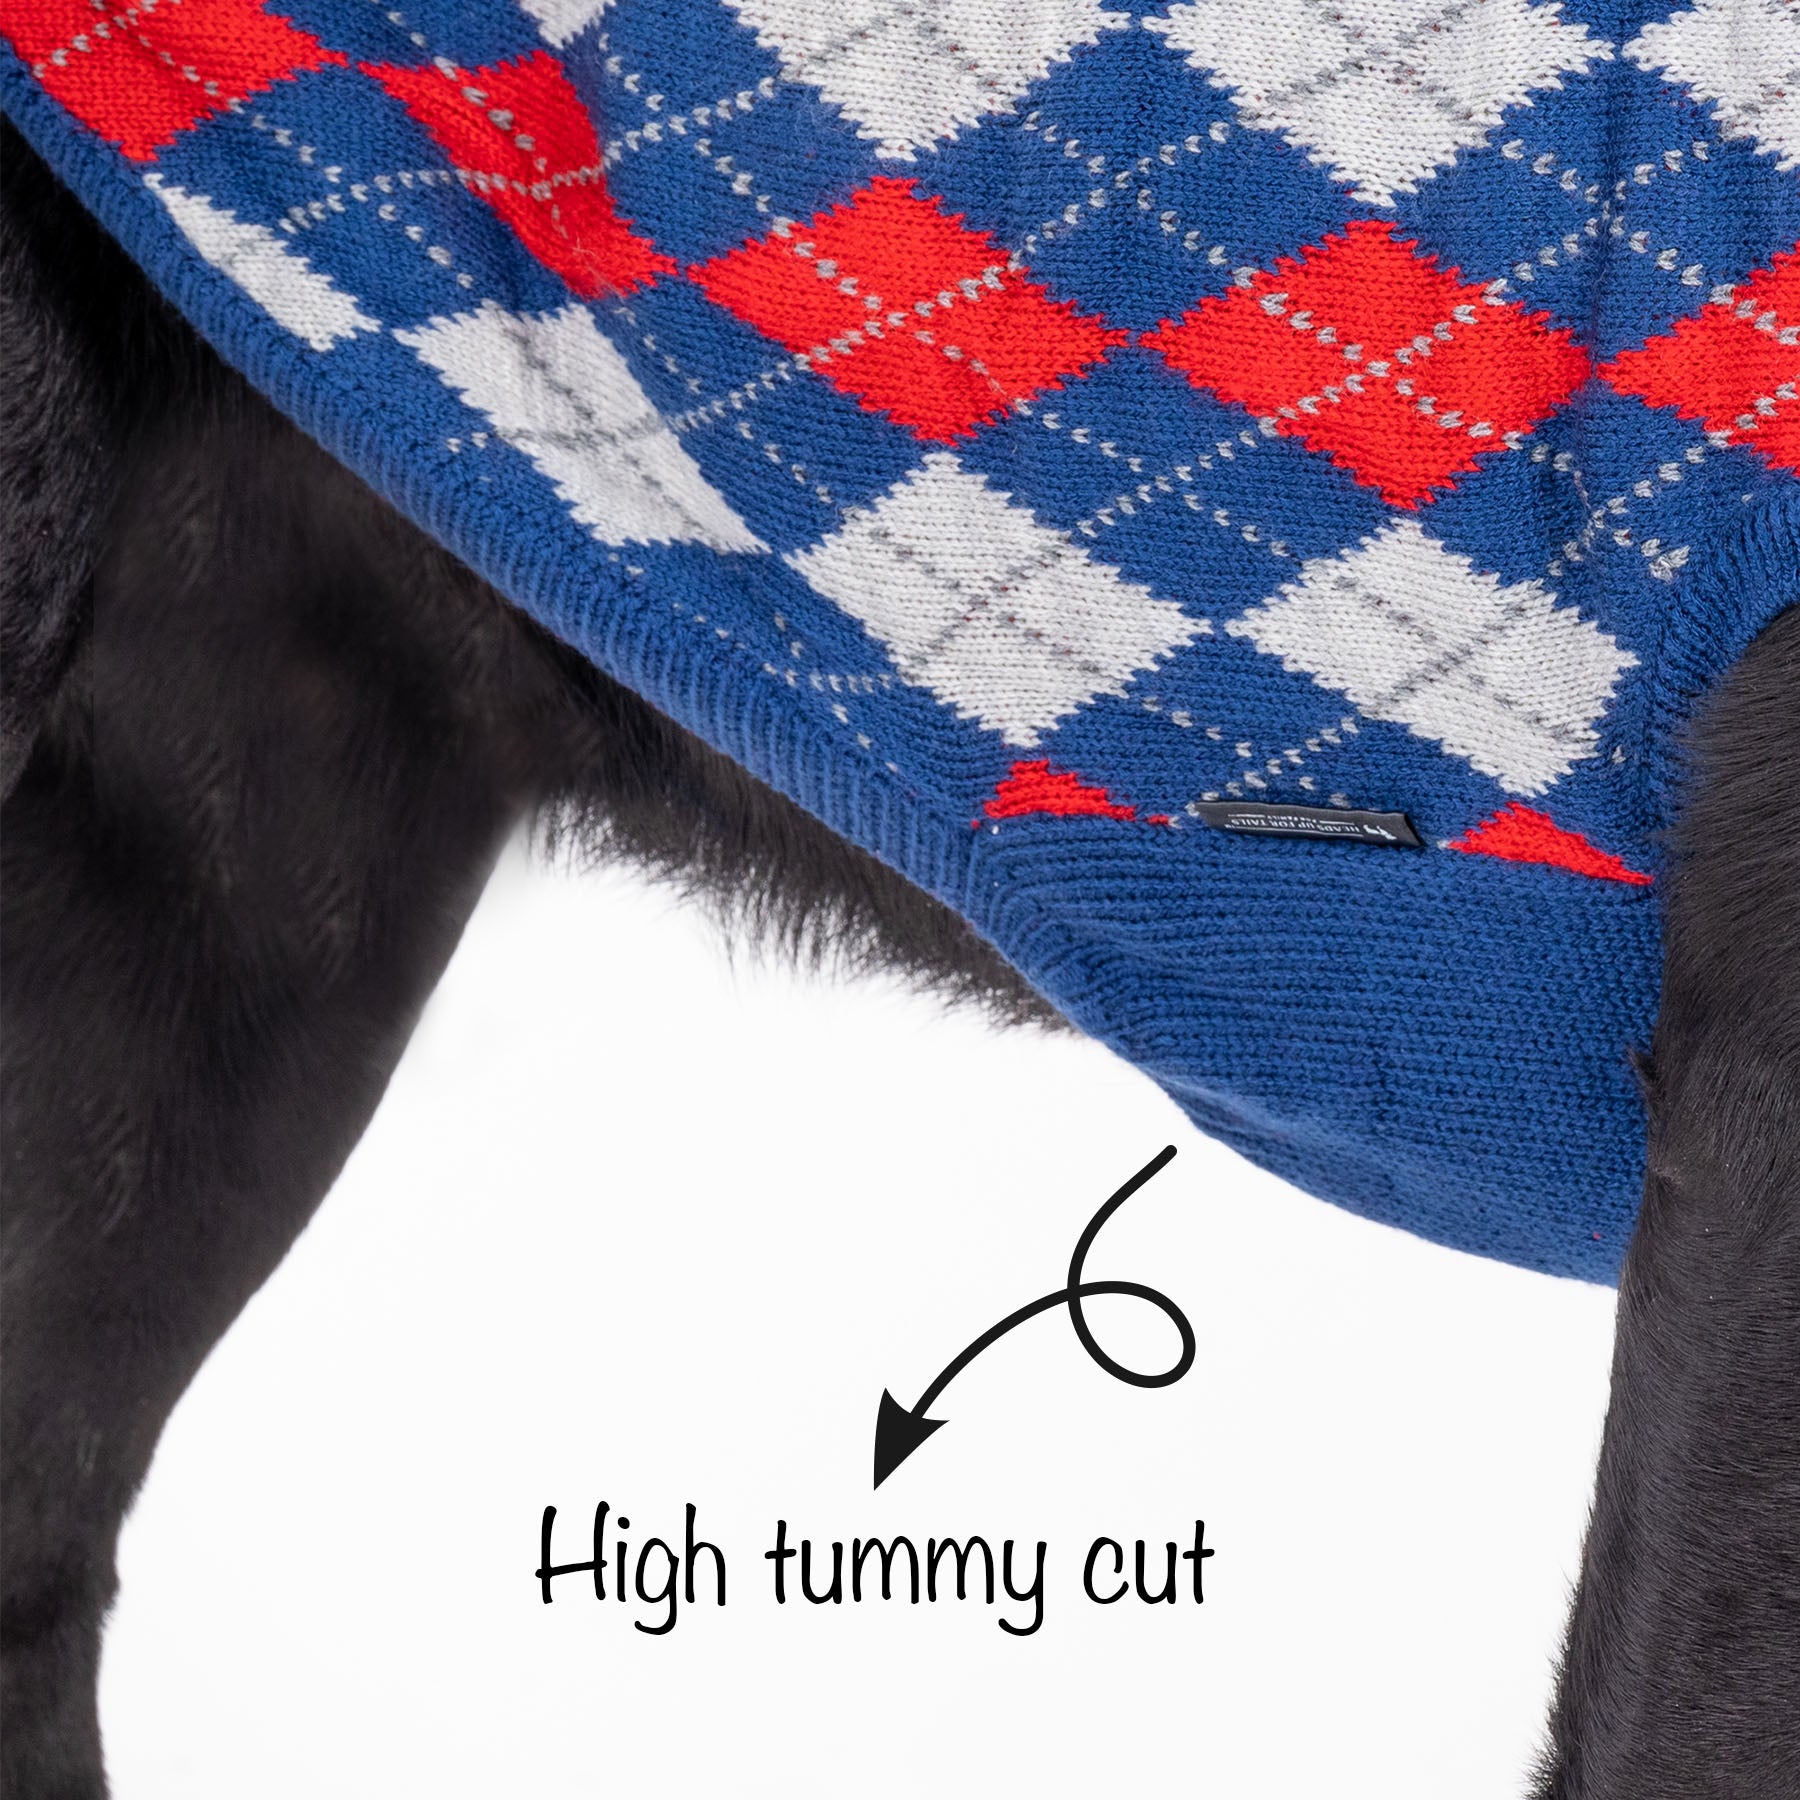 HUFT Argyle Pet Sweater - Red/Blue - Heads Up For Tails